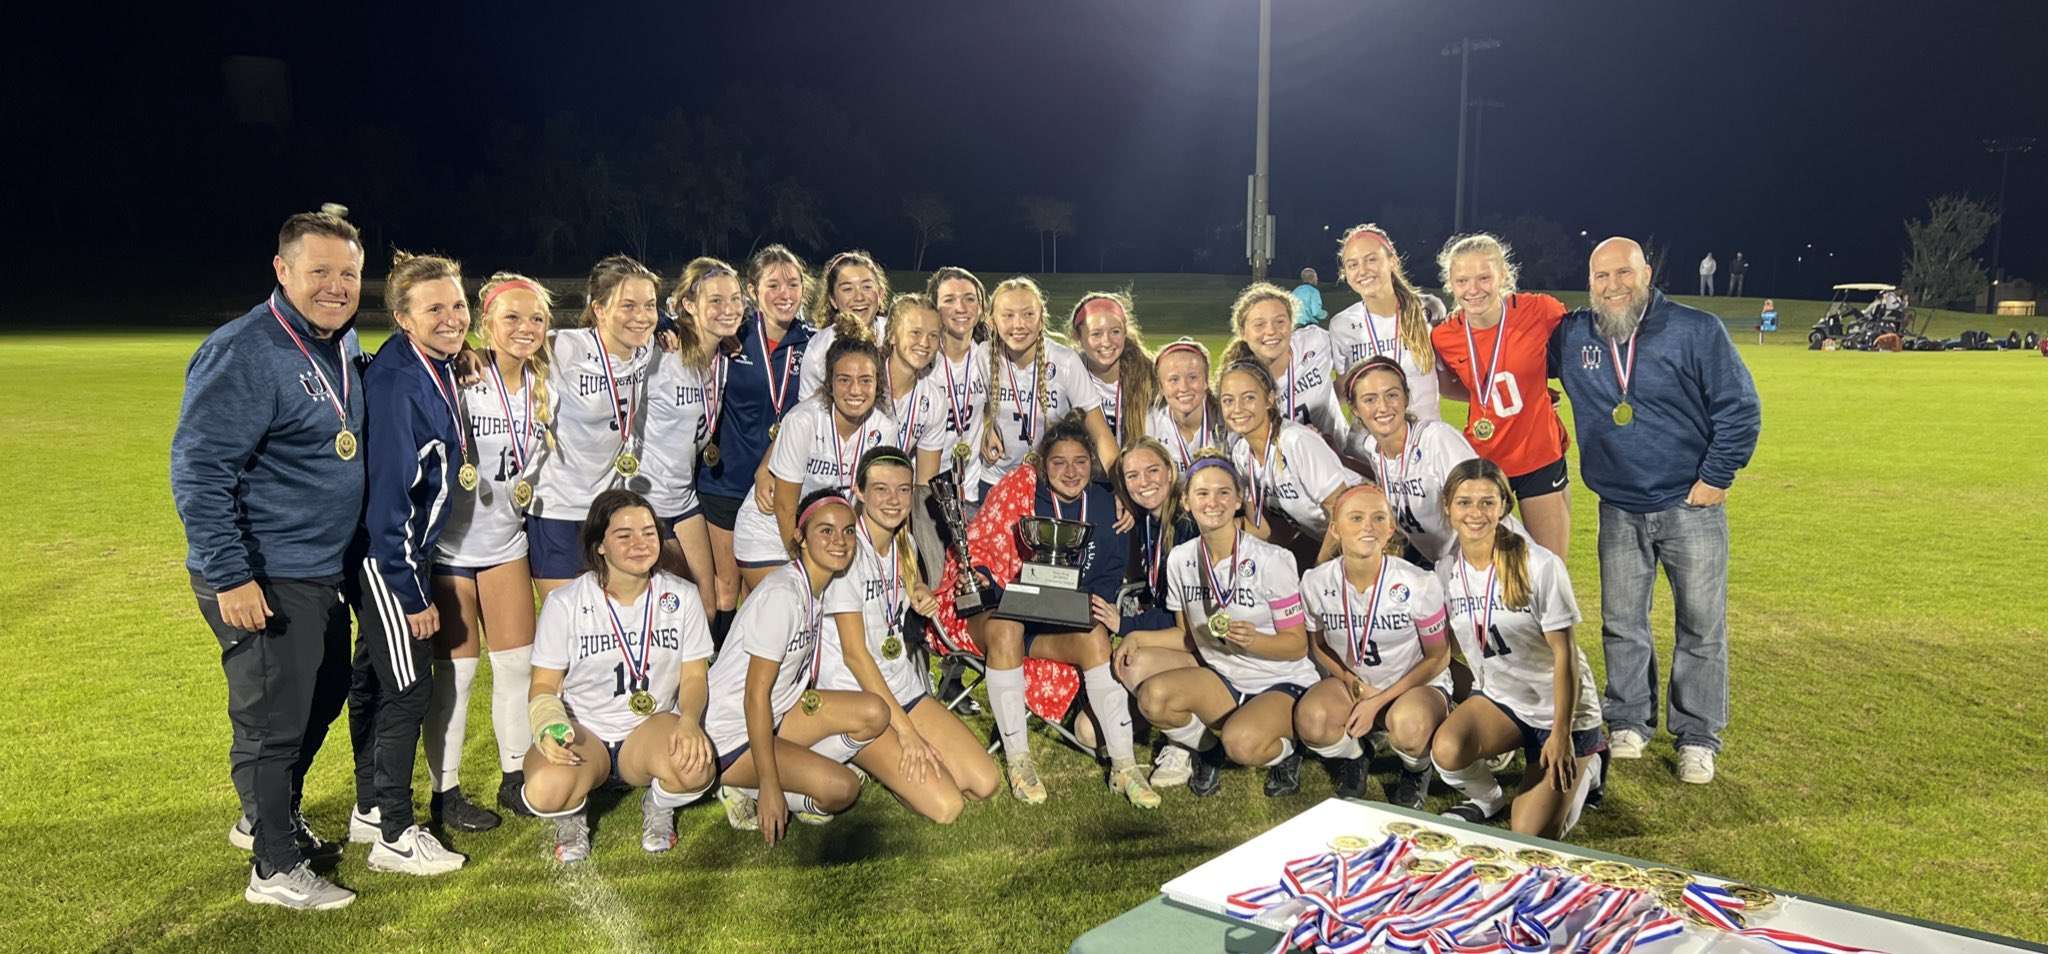 girls-soccer-district-tournament-schedules-released-jan-24-tampa